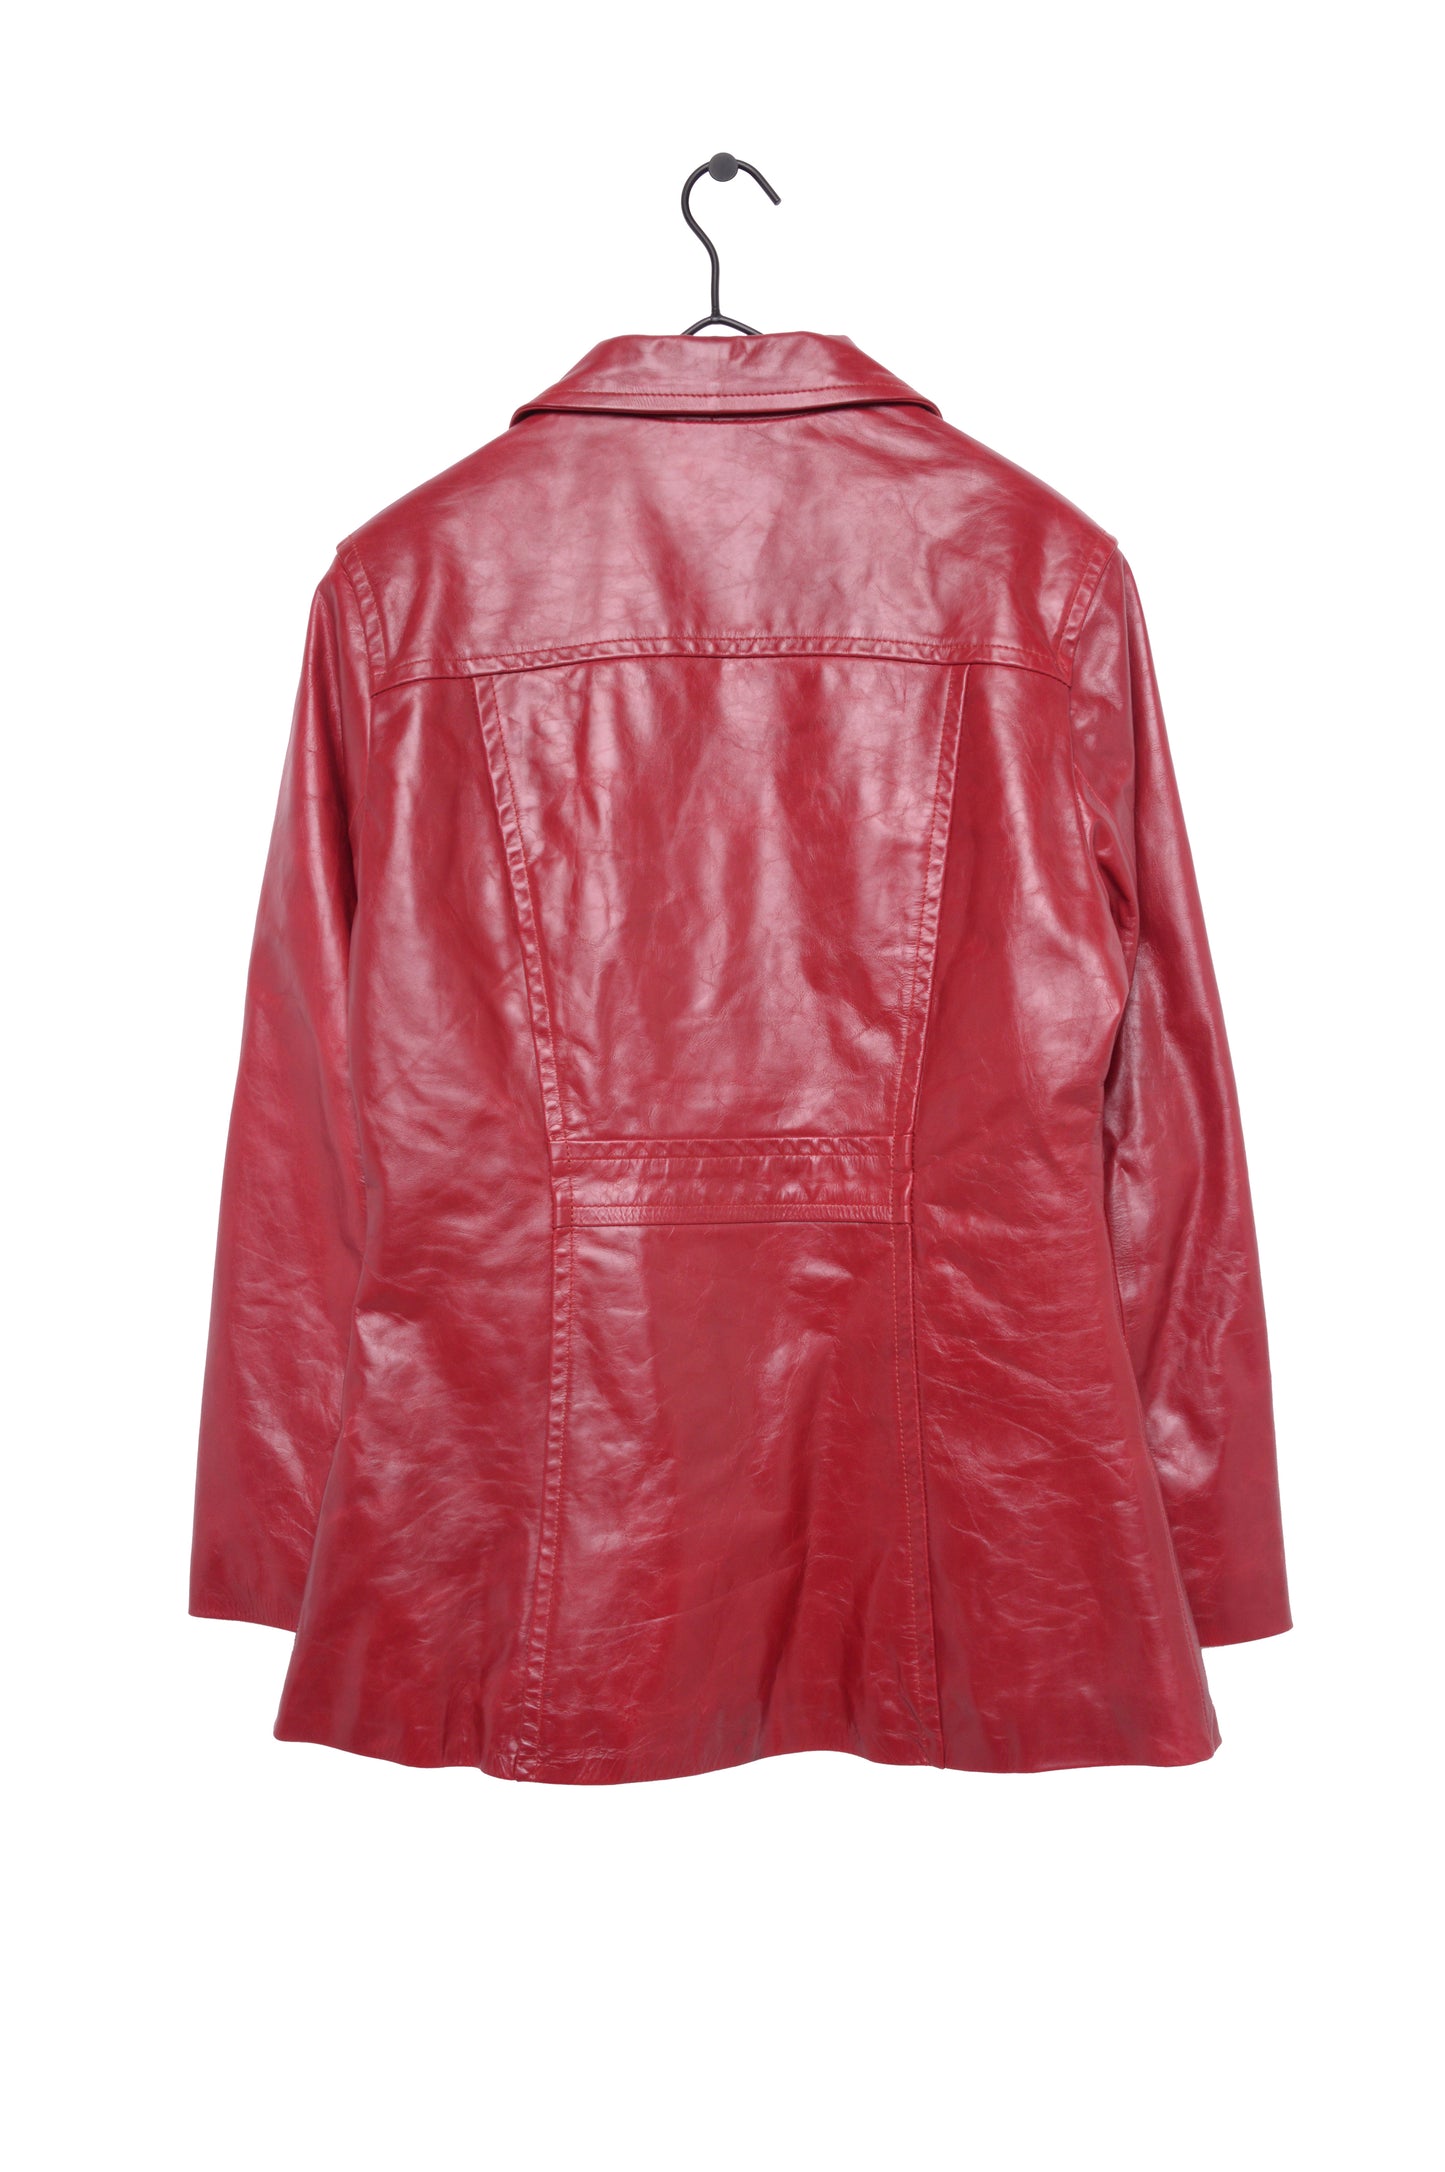 1990s Cherry Red Leather Jacket